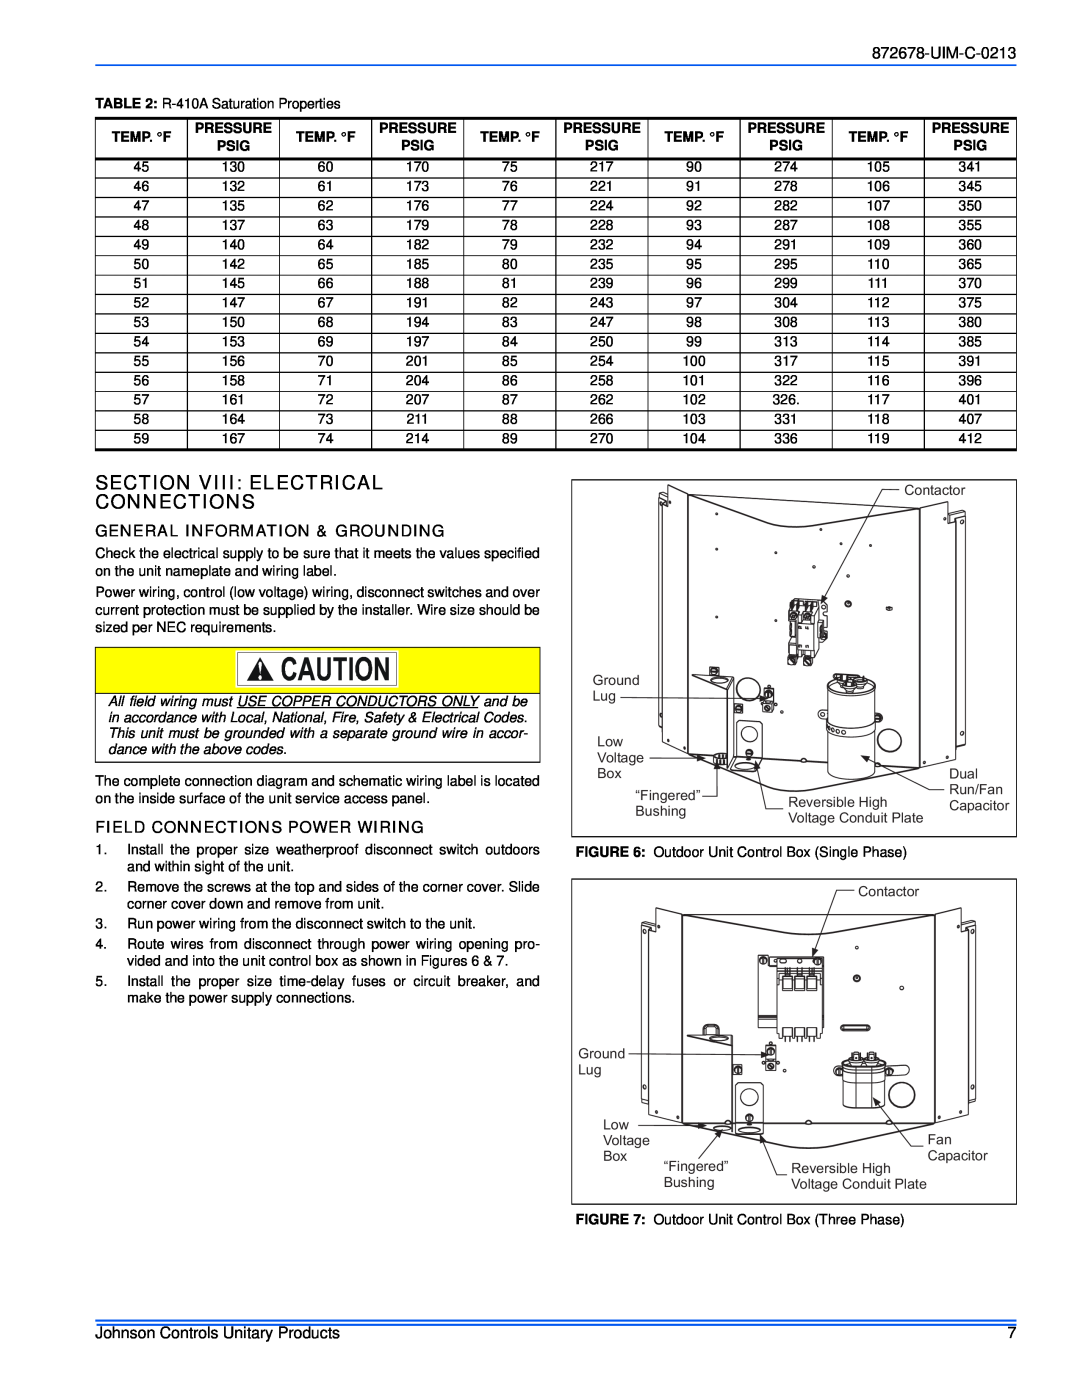 Johnson Controls TCJ(D, YCJ(D, GCGD, F) SERIES Section Viii Electrical Connections, General Information & Grounding 